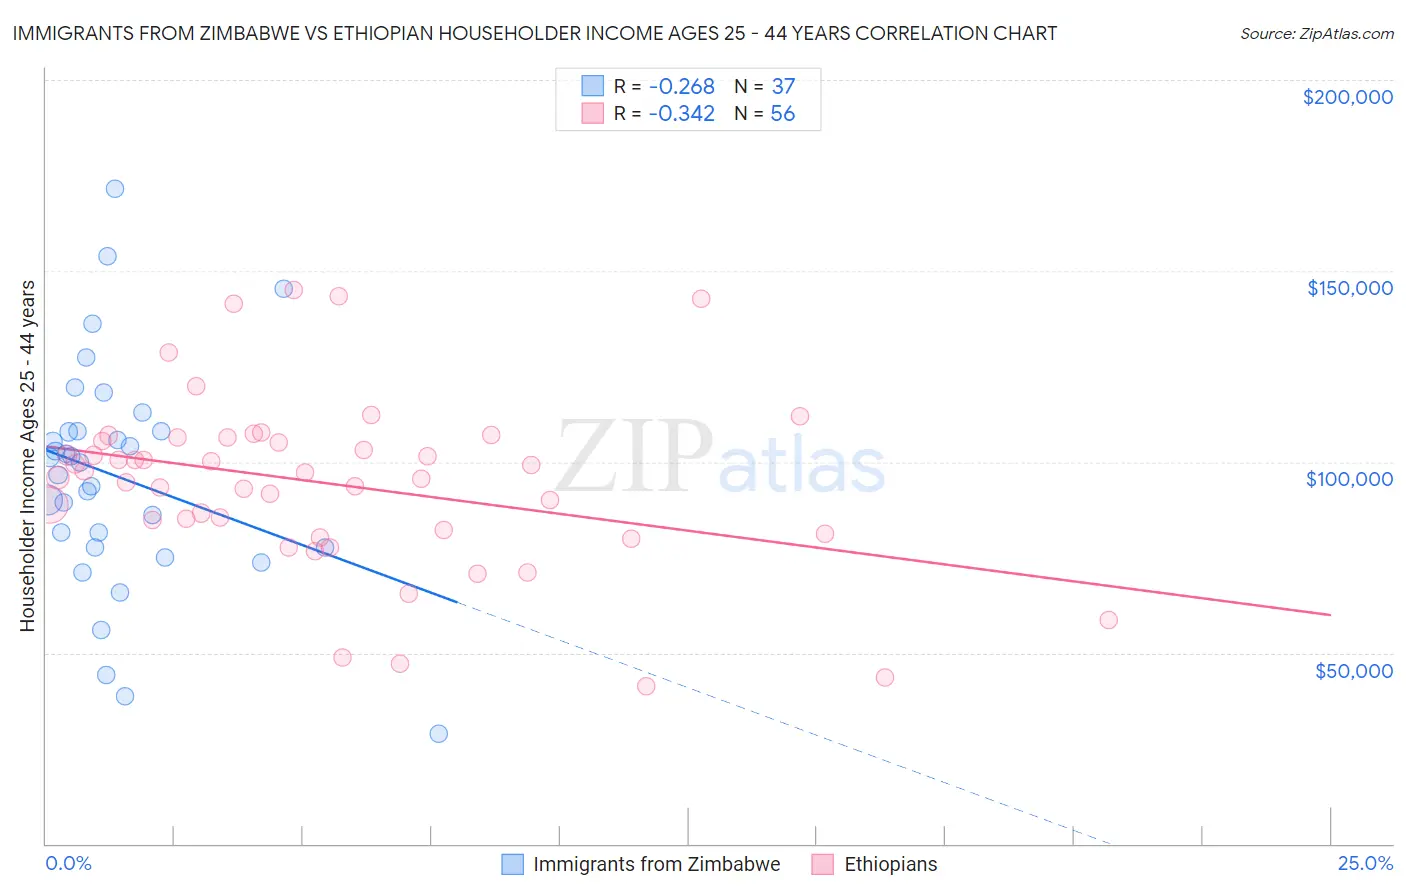 Immigrants from Zimbabwe vs Ethiopian Householder Income Ages 25 - 44 years